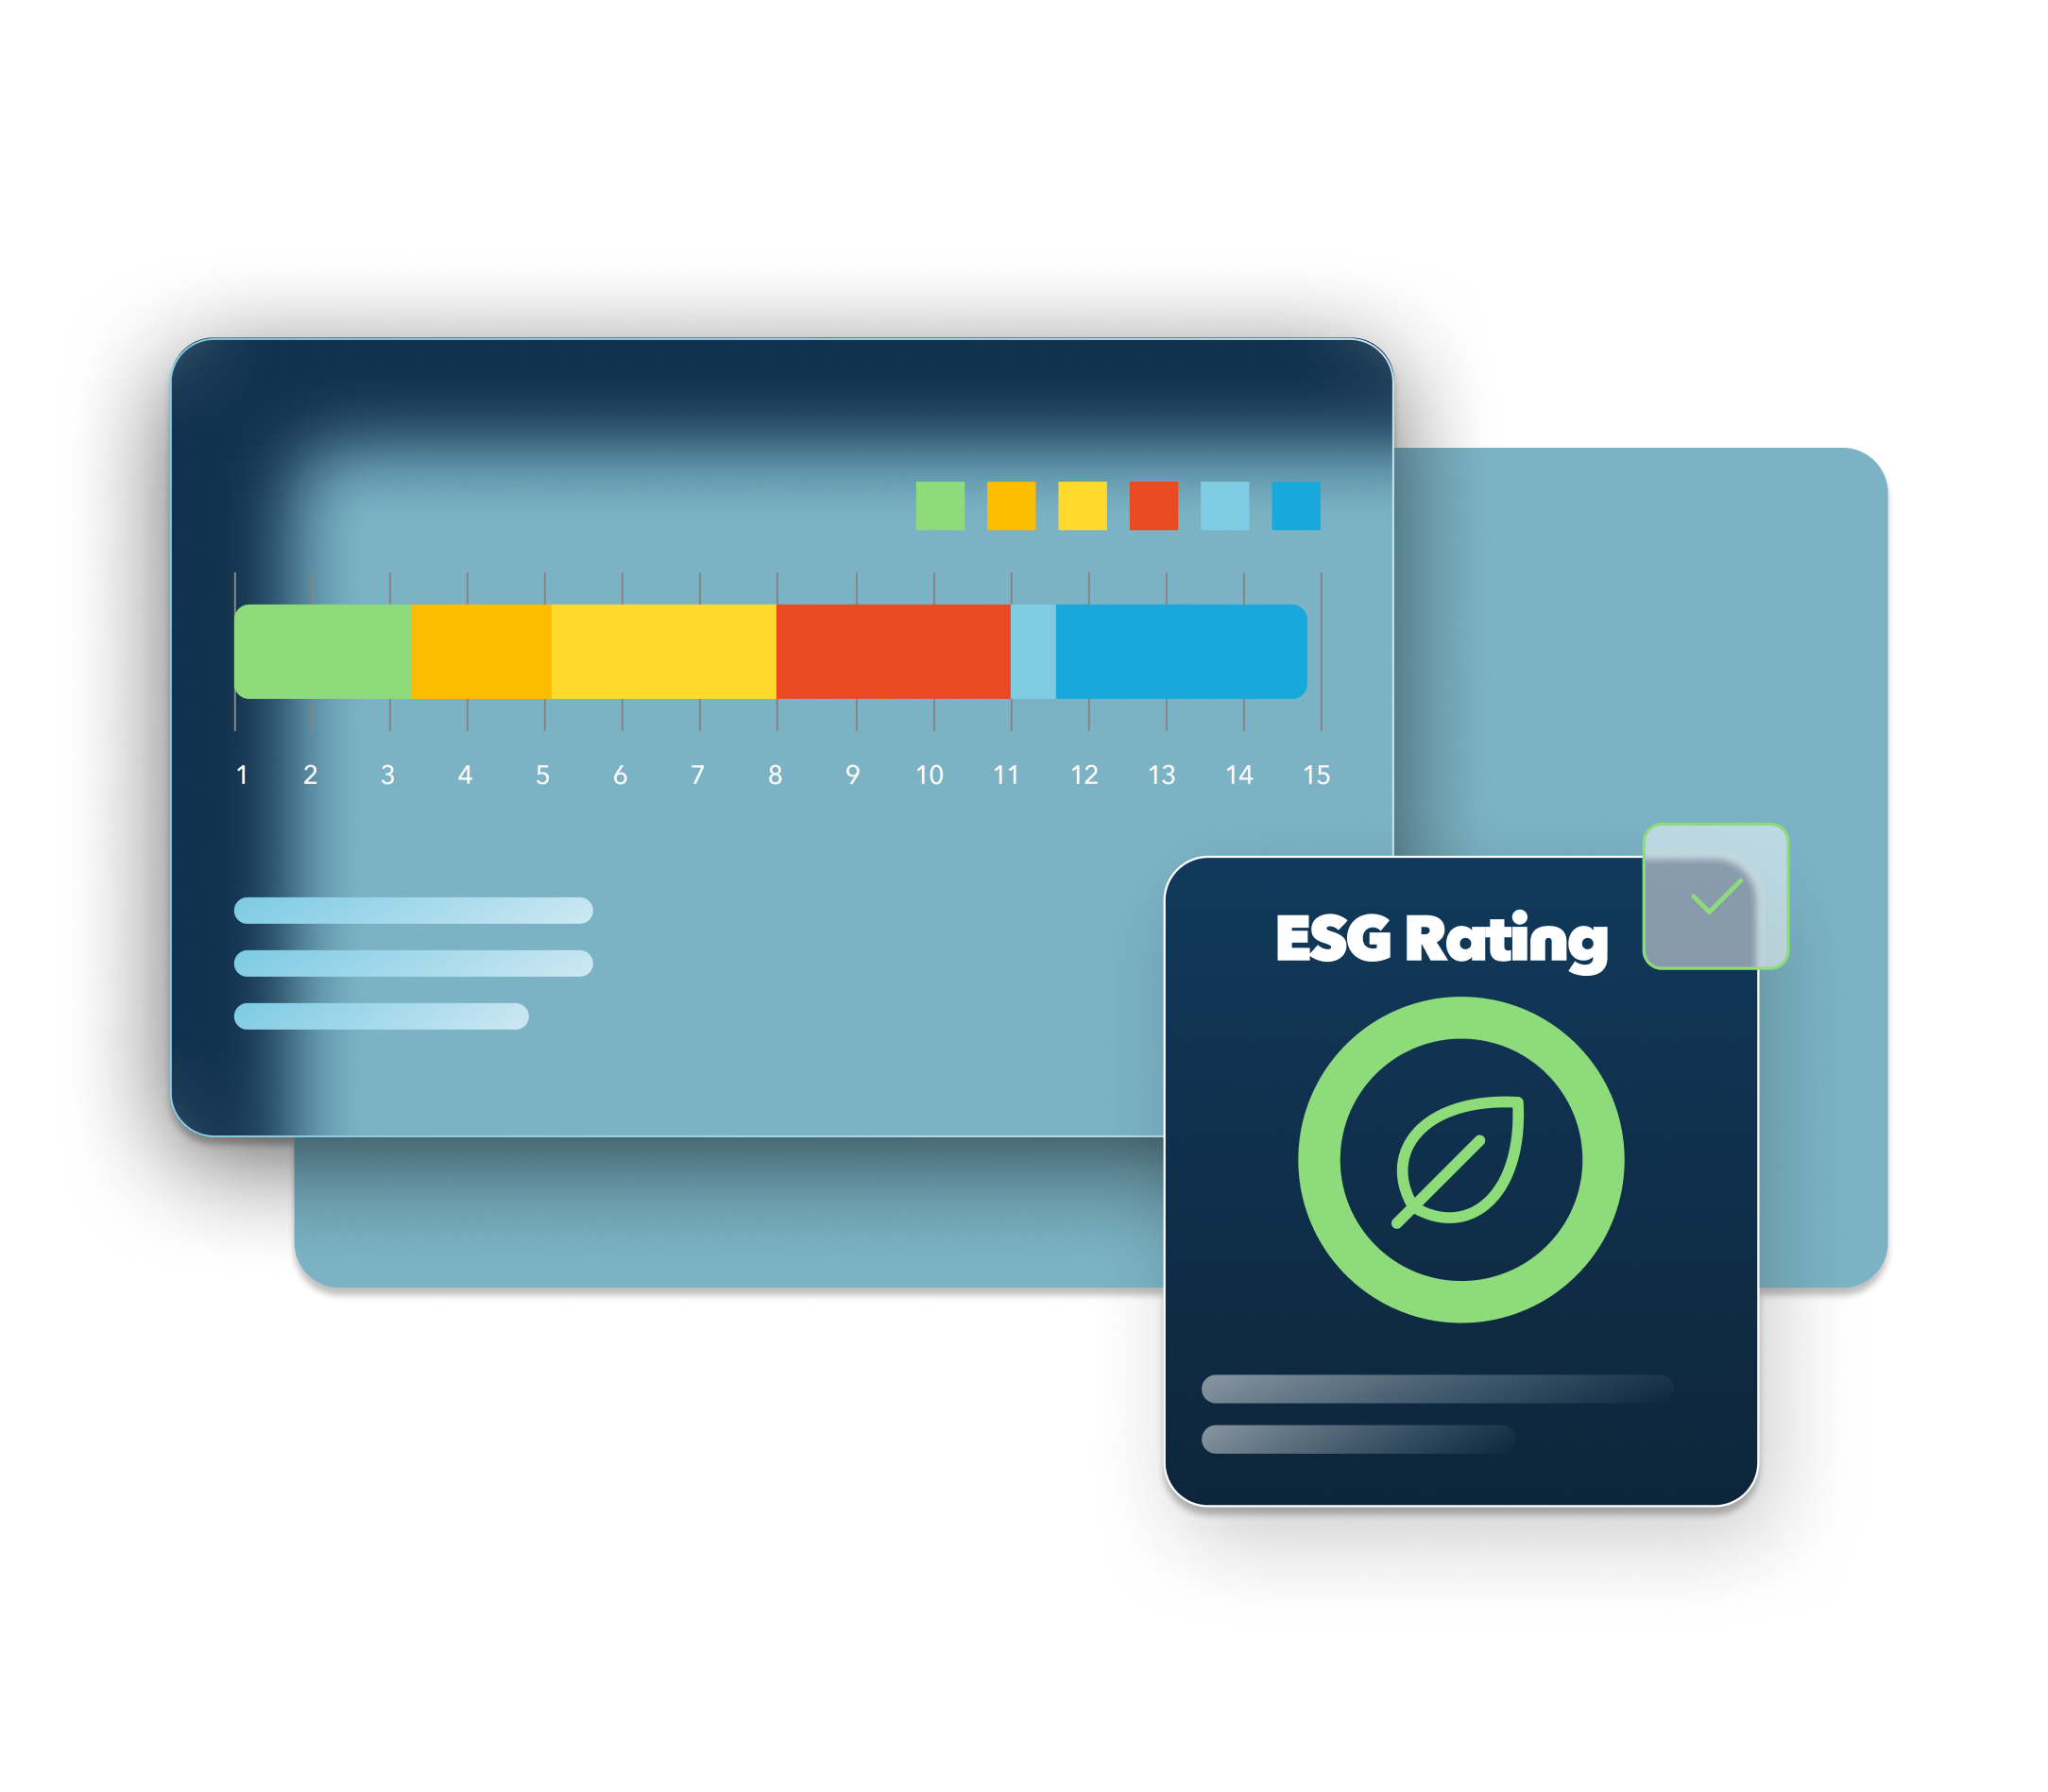 An abstracted software interface that represents corporate banking through ESG logos and status bars.